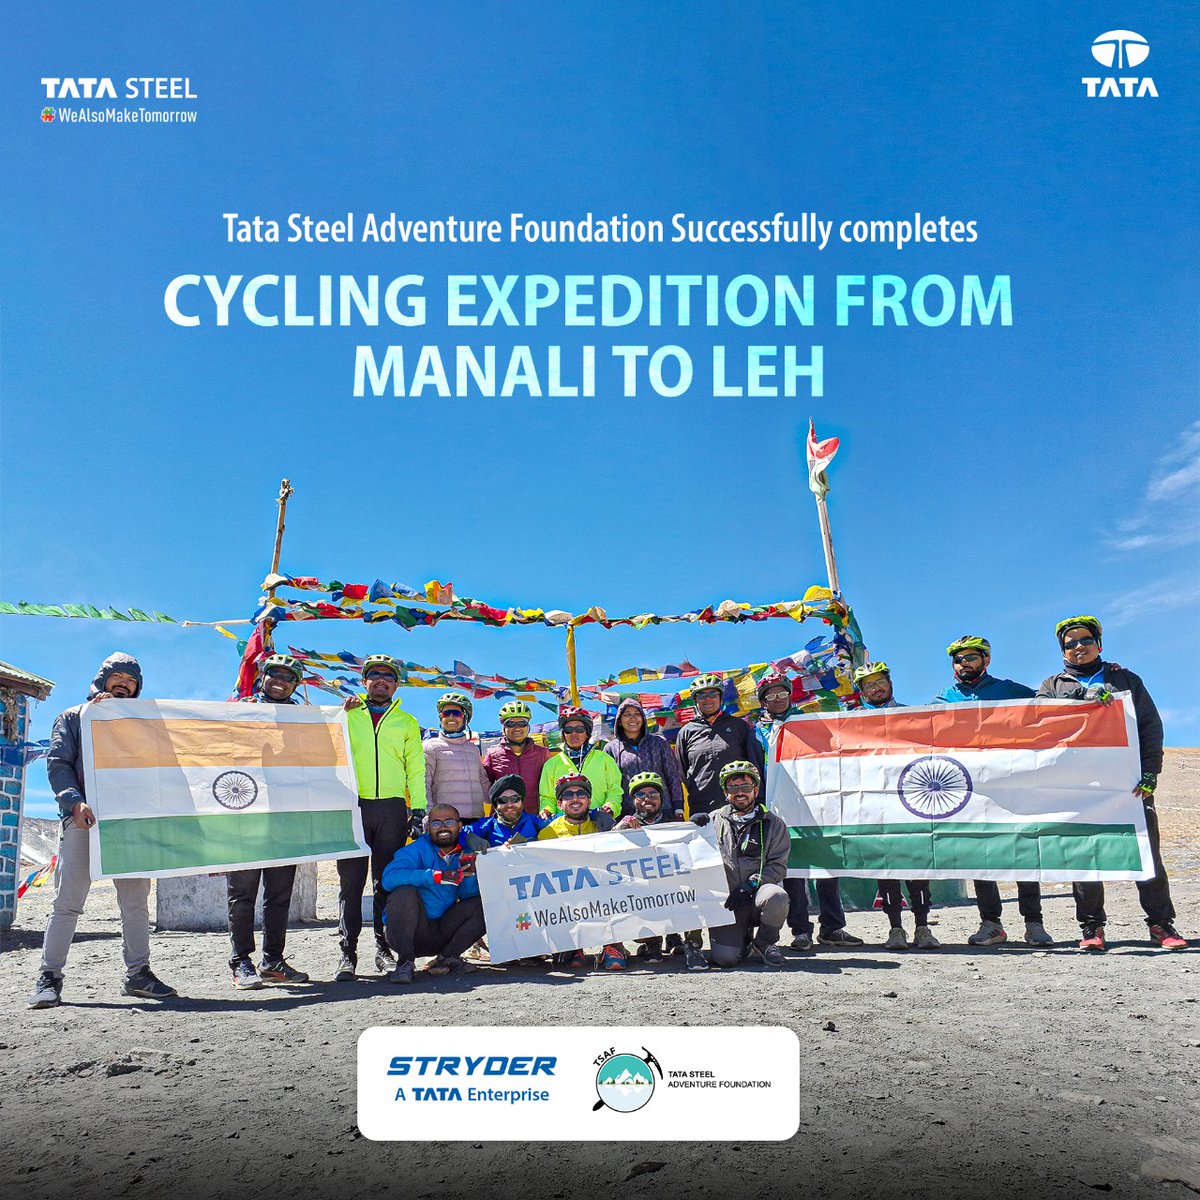 #TataSteelAdventureFoundation successfully completed a 490 km cycling expedition. Under the theme 'Pedal for a Purpose,' the journey highlighted responsible travel & individual contributions to a greener future.

#TataSteel #TSAF #PedalForAPurpose